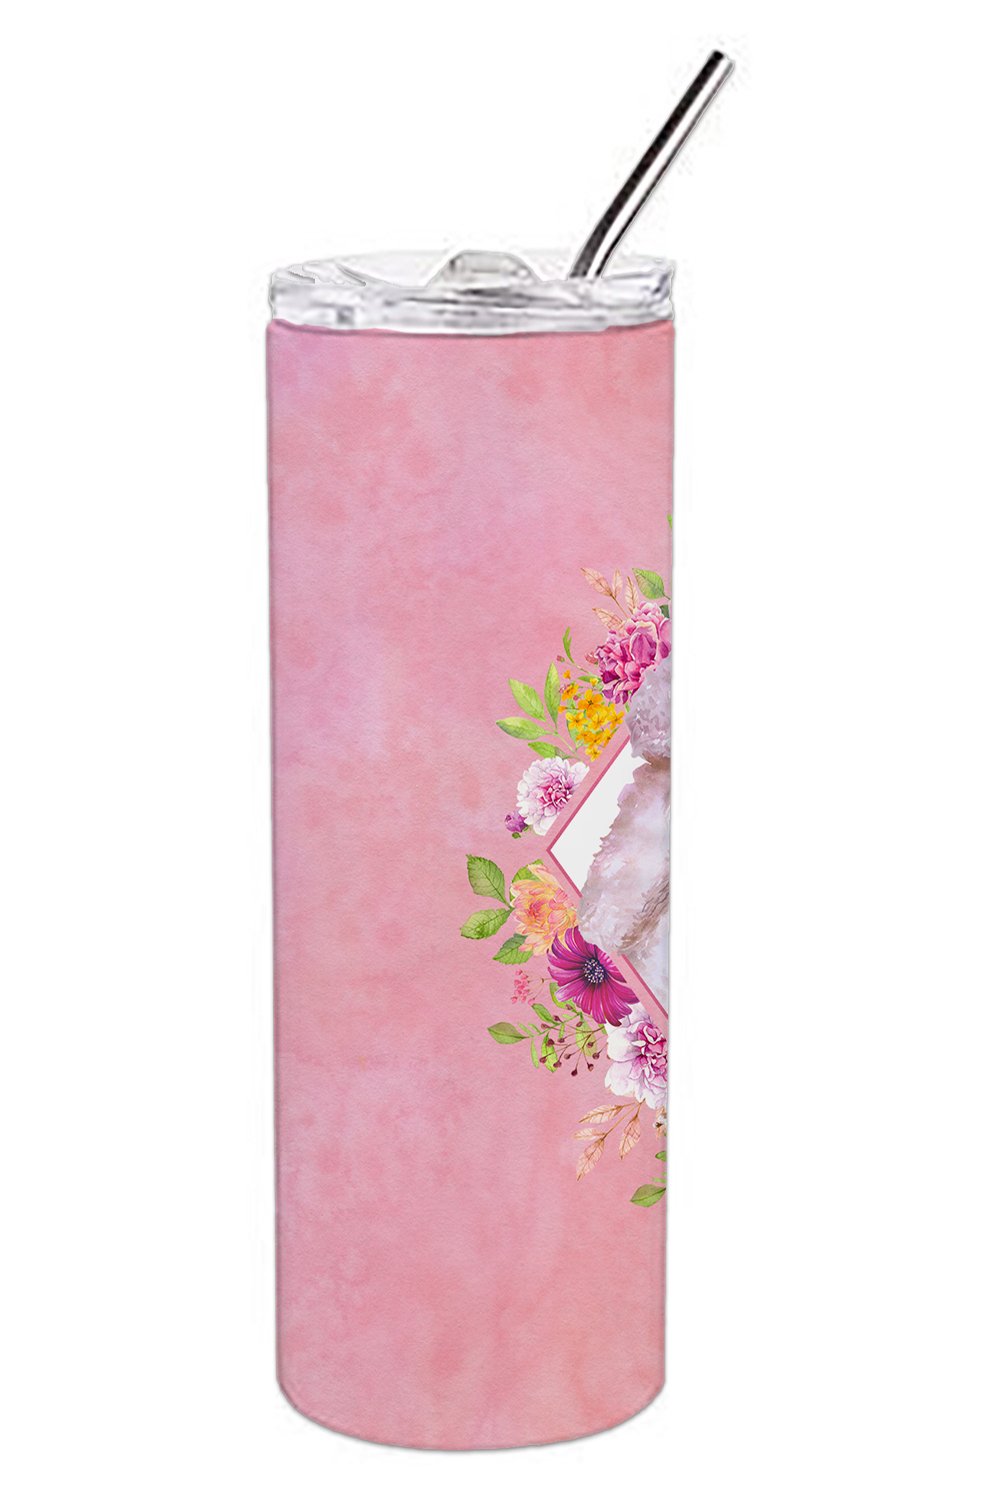 Standard White Poodle Pink Flowers Double Walled Stainless Steel 20 oz Skinny Tumbler CK4171TBL20 by Caroline's Treasures